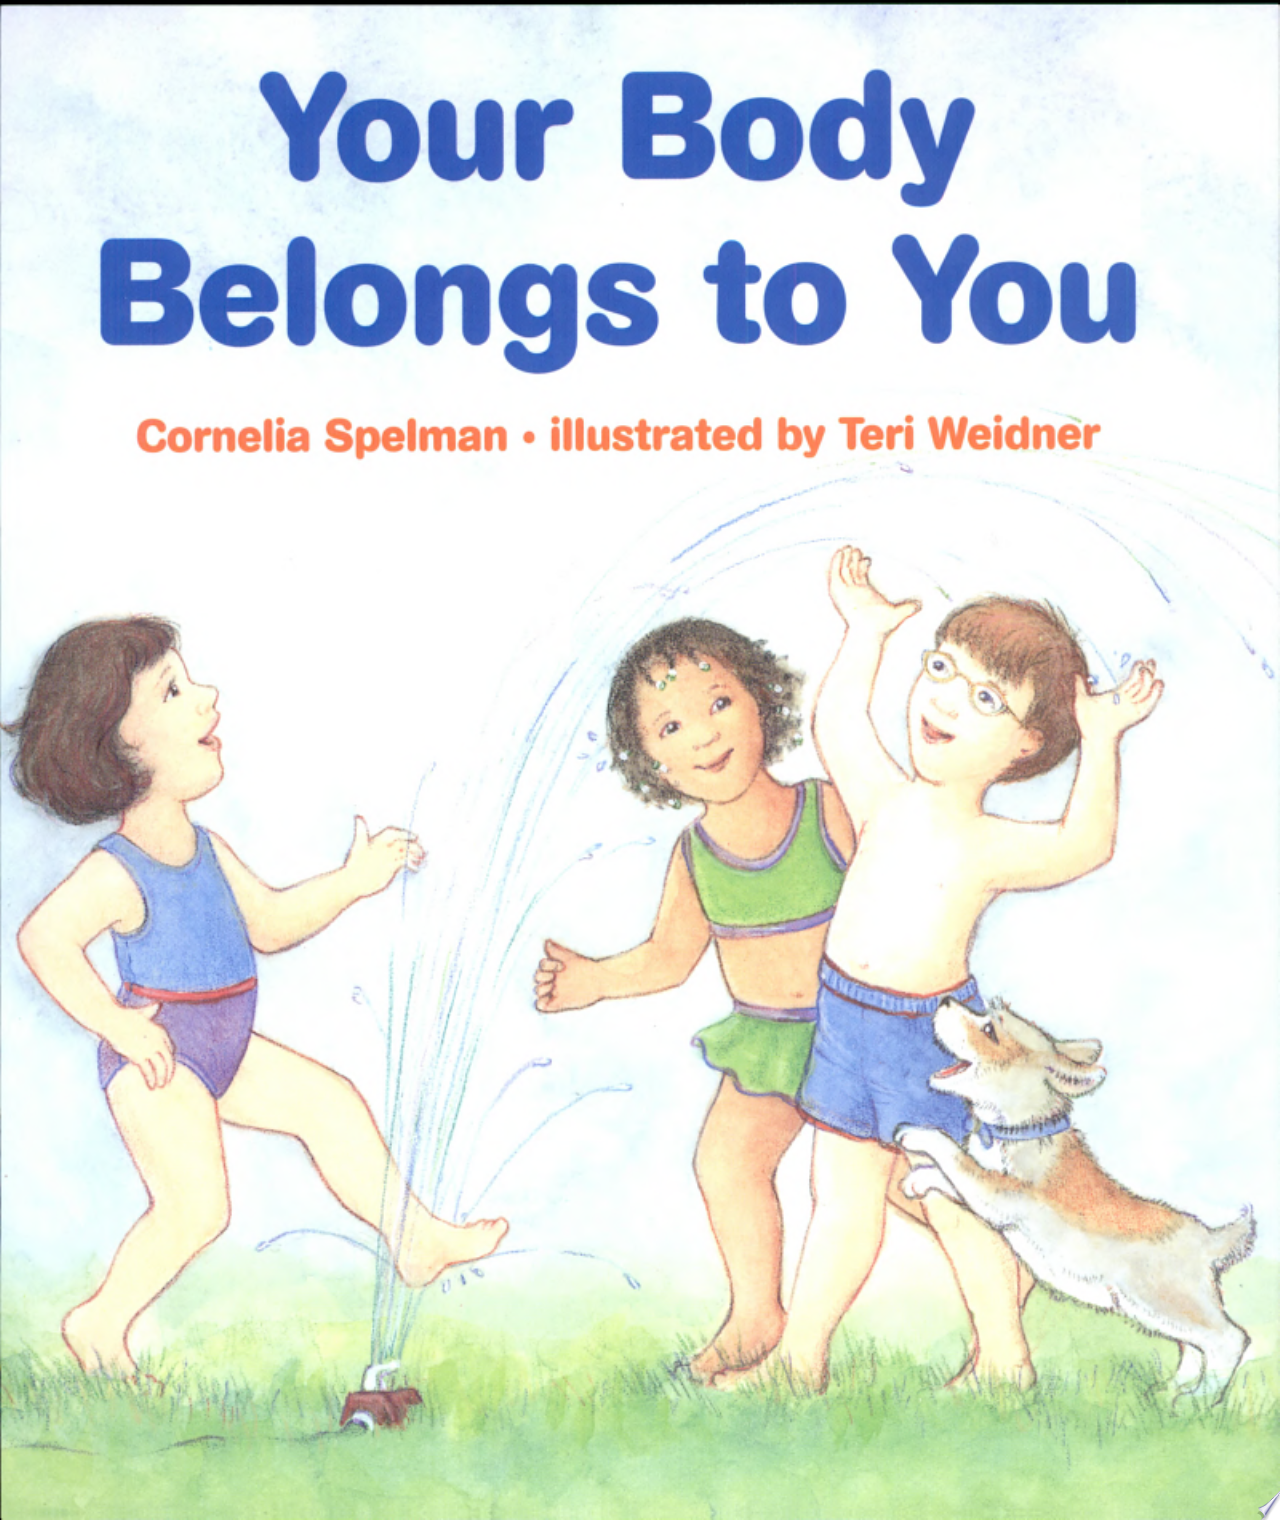 Image for "Your Body Belongs to You"